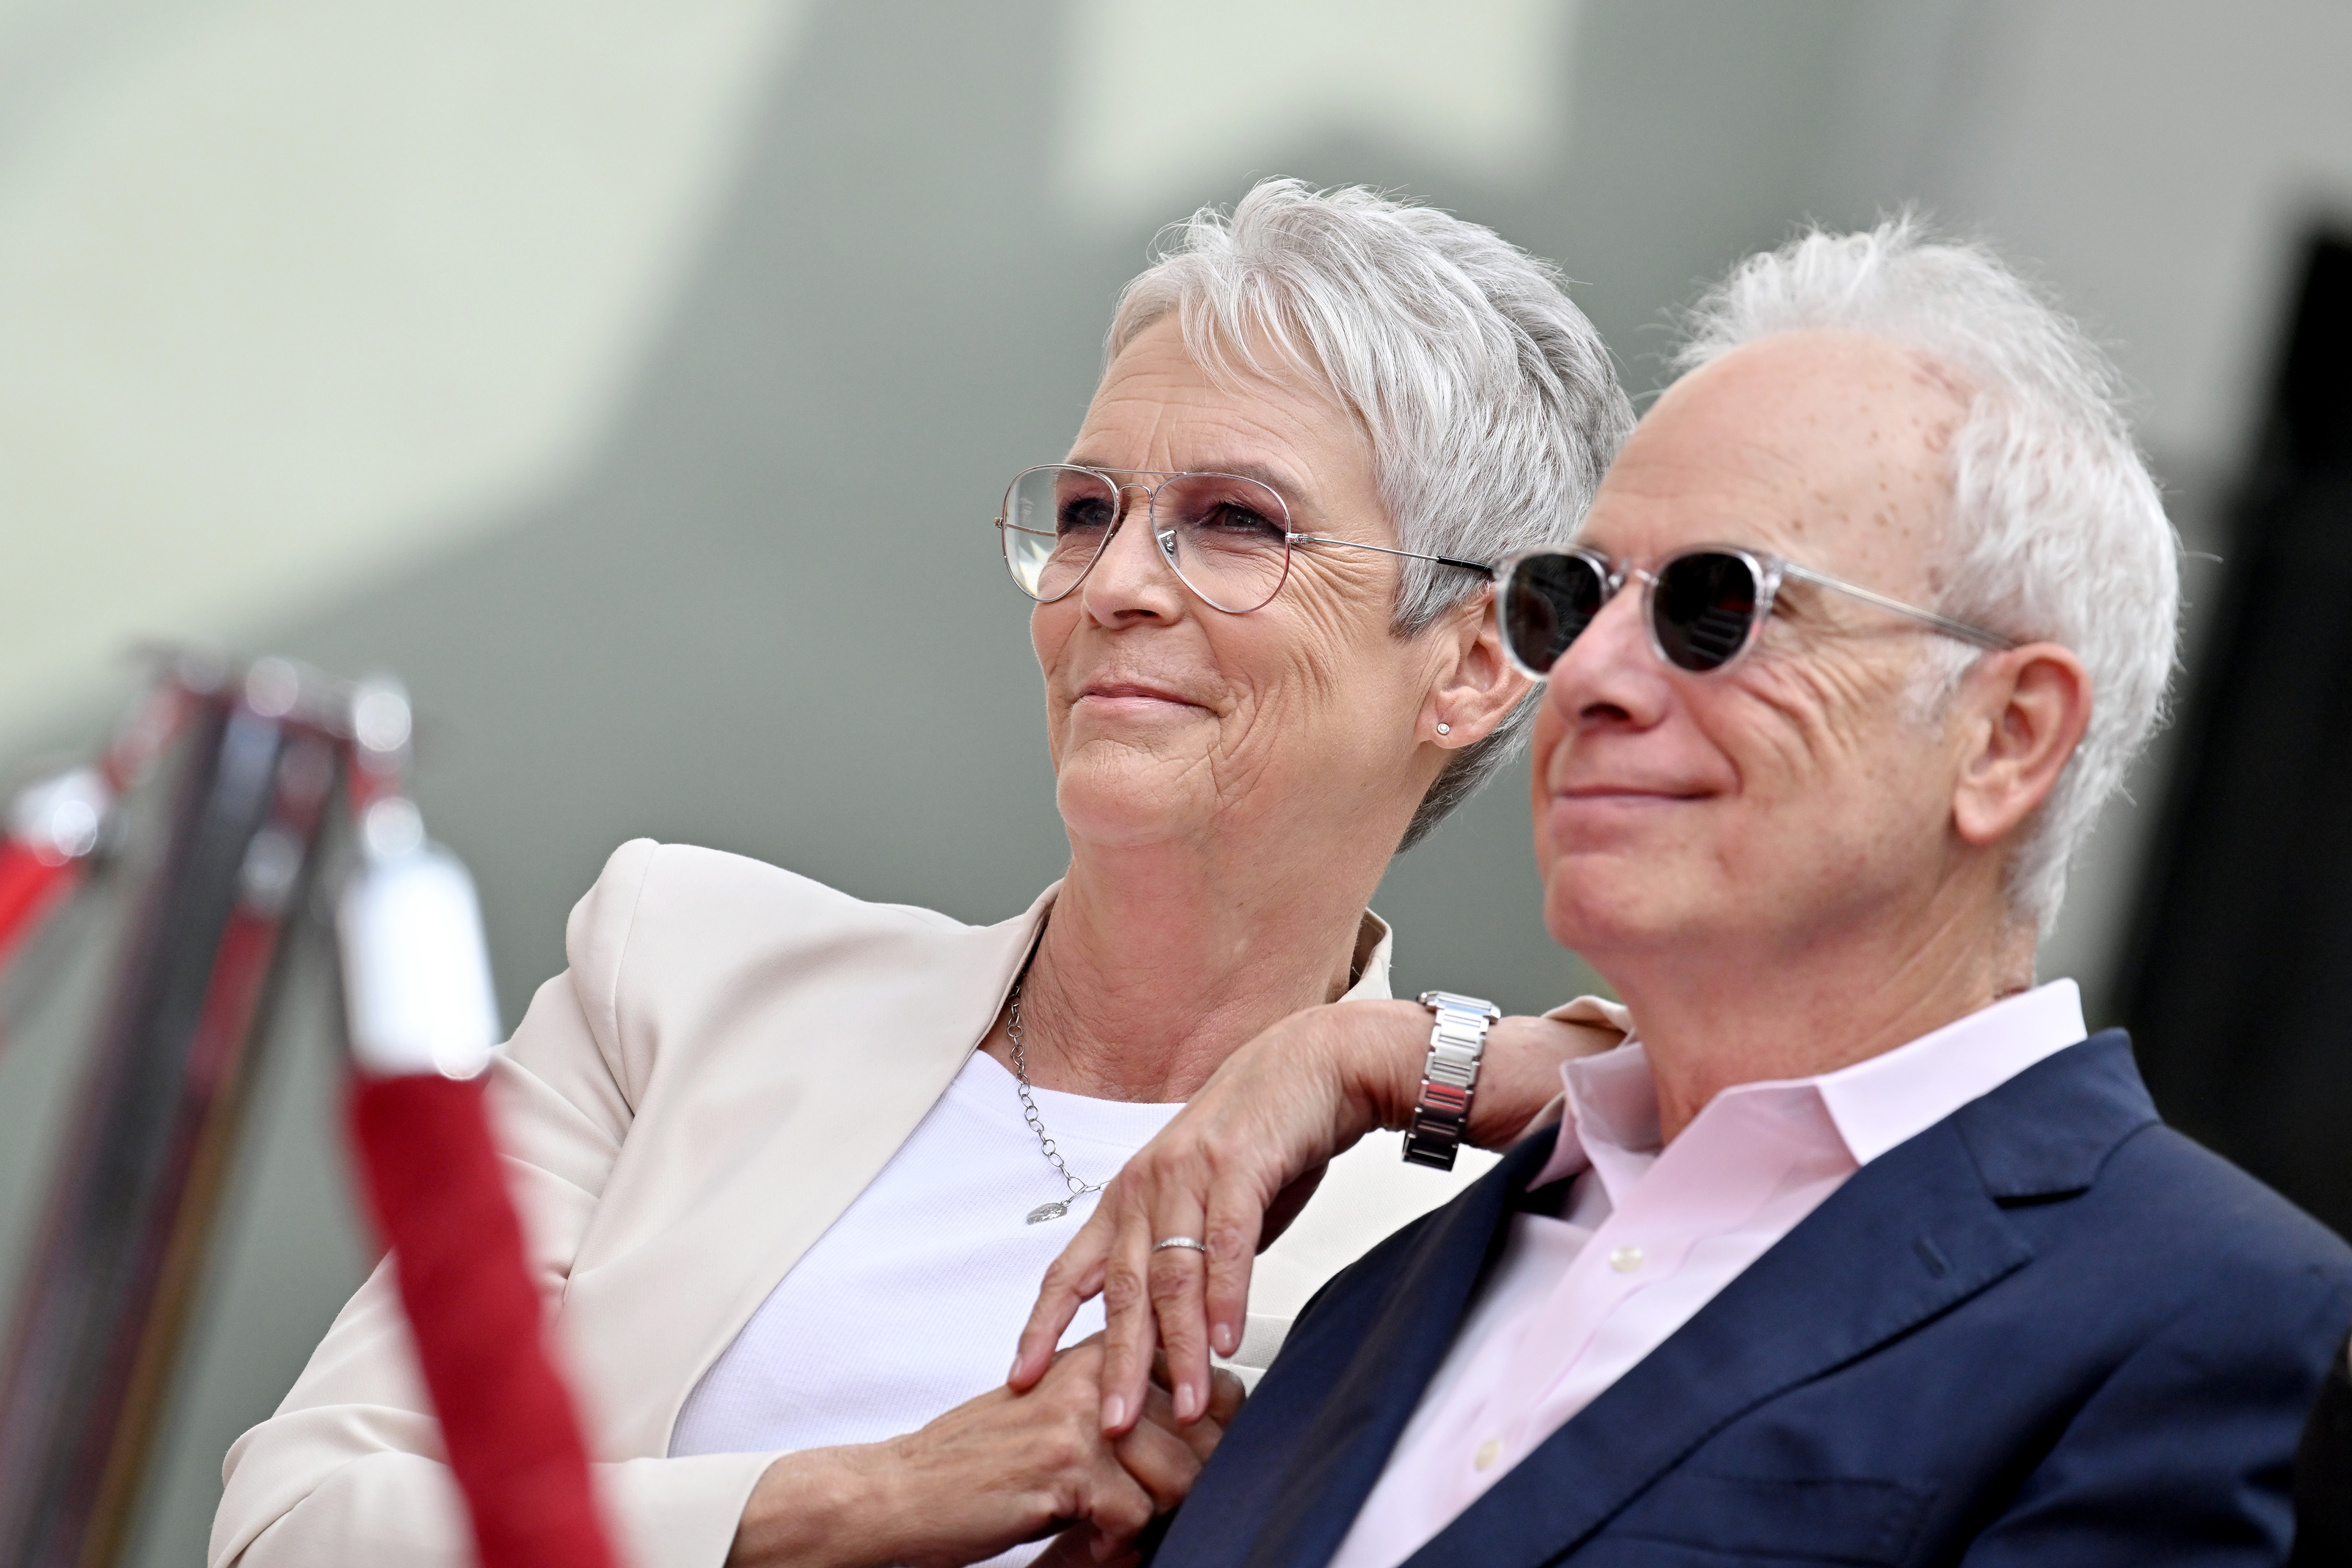 Jamie Lee Curtis and Christopher Guest attend the Jamie Lee Curtis Hand and Footprint Ceremony at TCL Chinese Theatre in Hollywood, California on October 12, 2022. | Source: Getty Images